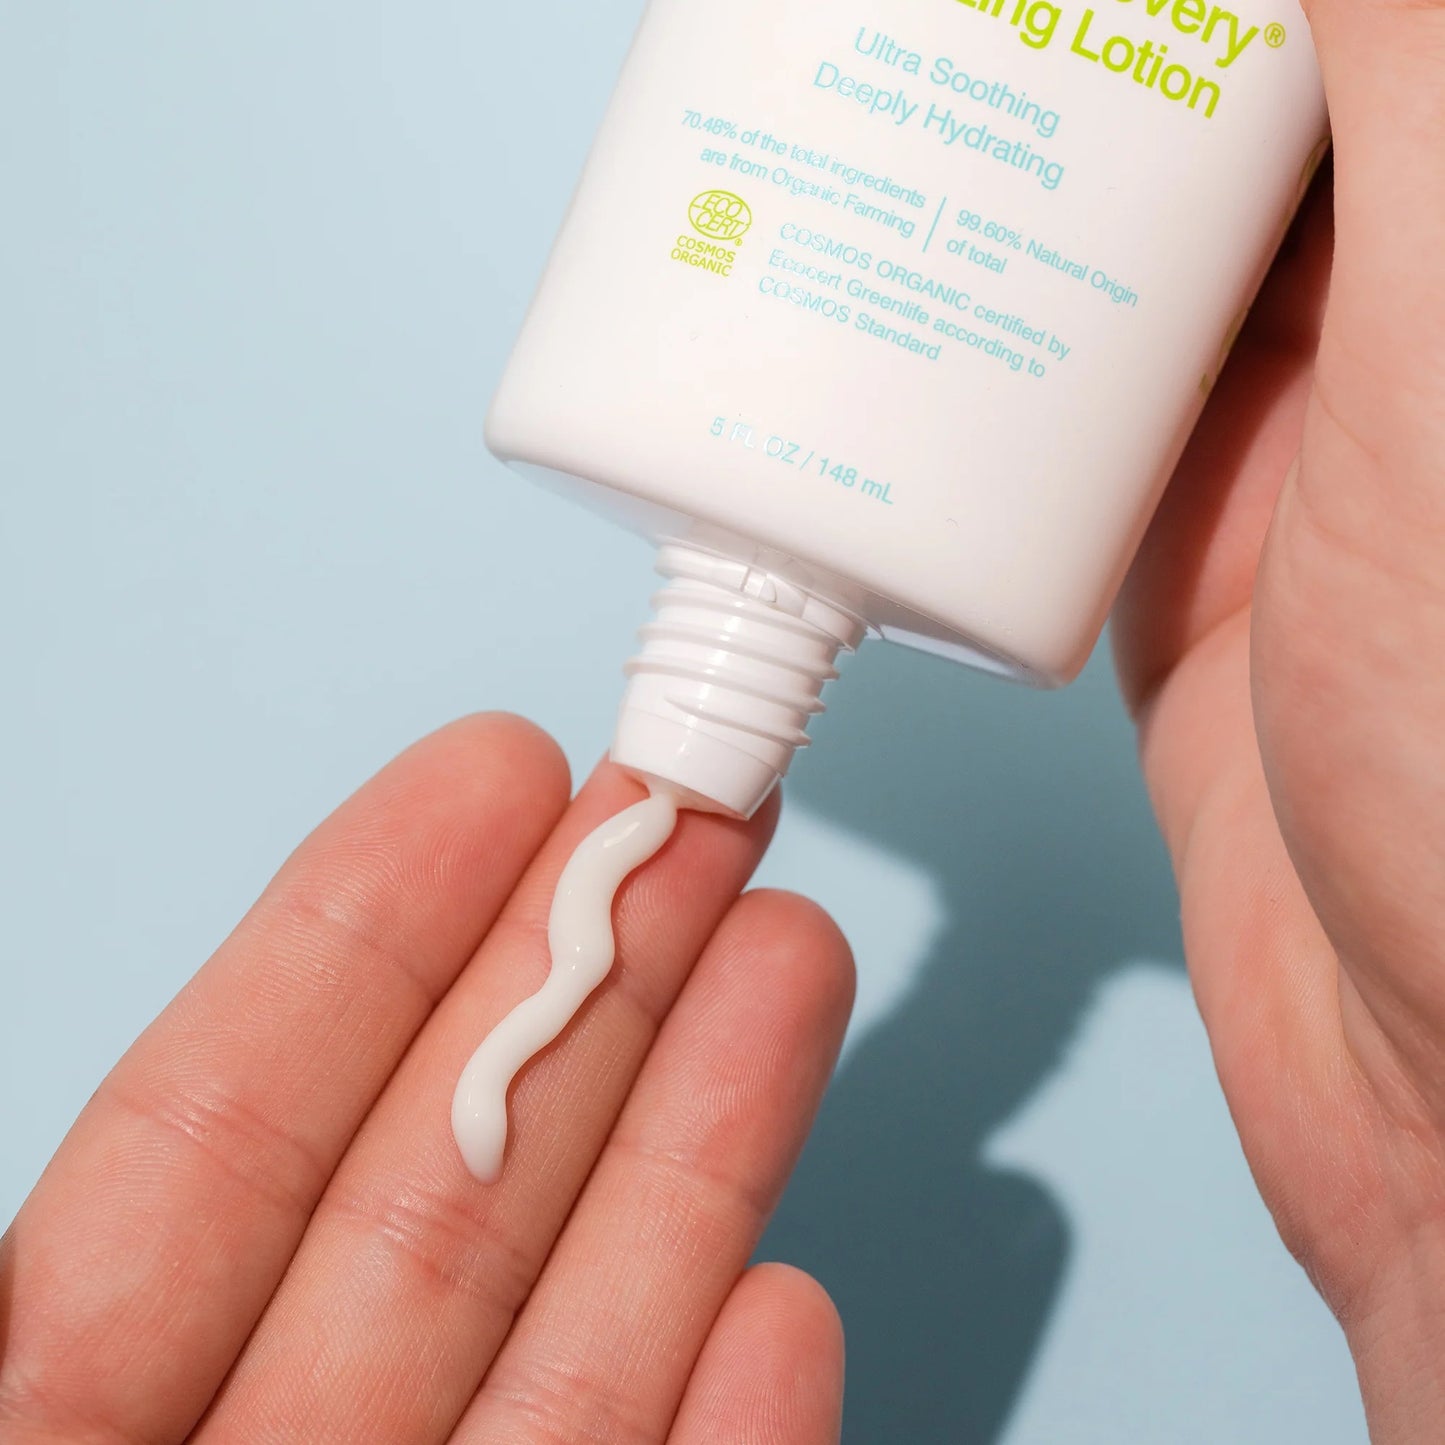 COOLA Radical Recovery Eco-Cert Organic After Sun Lotion